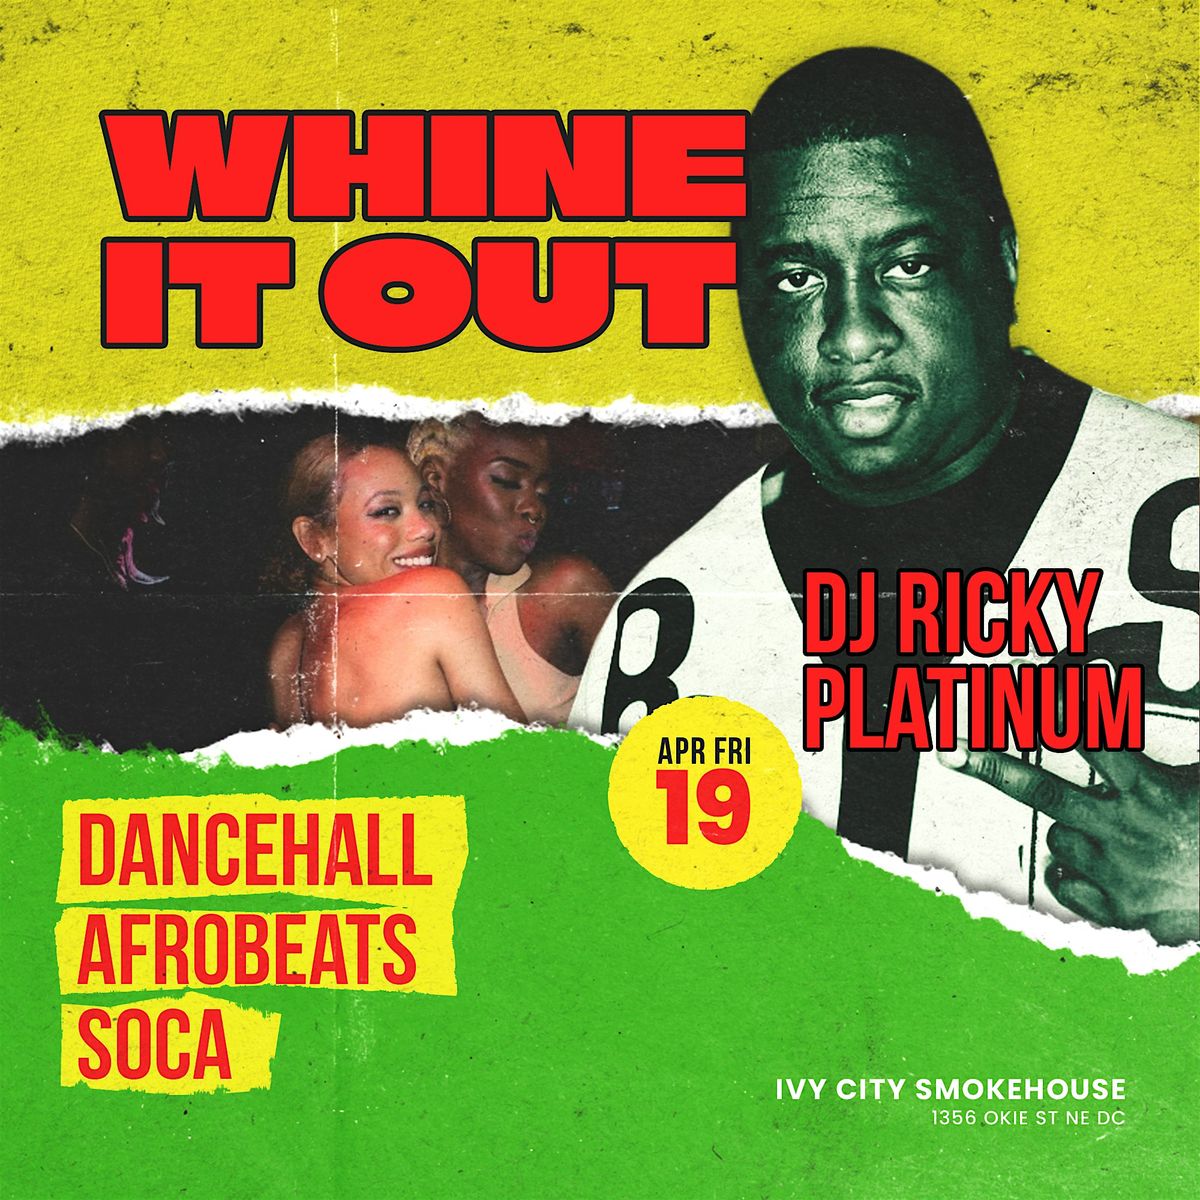 WHINE IT OUT - Reggae, Dancehall, Soca & AfroBeats Bashment